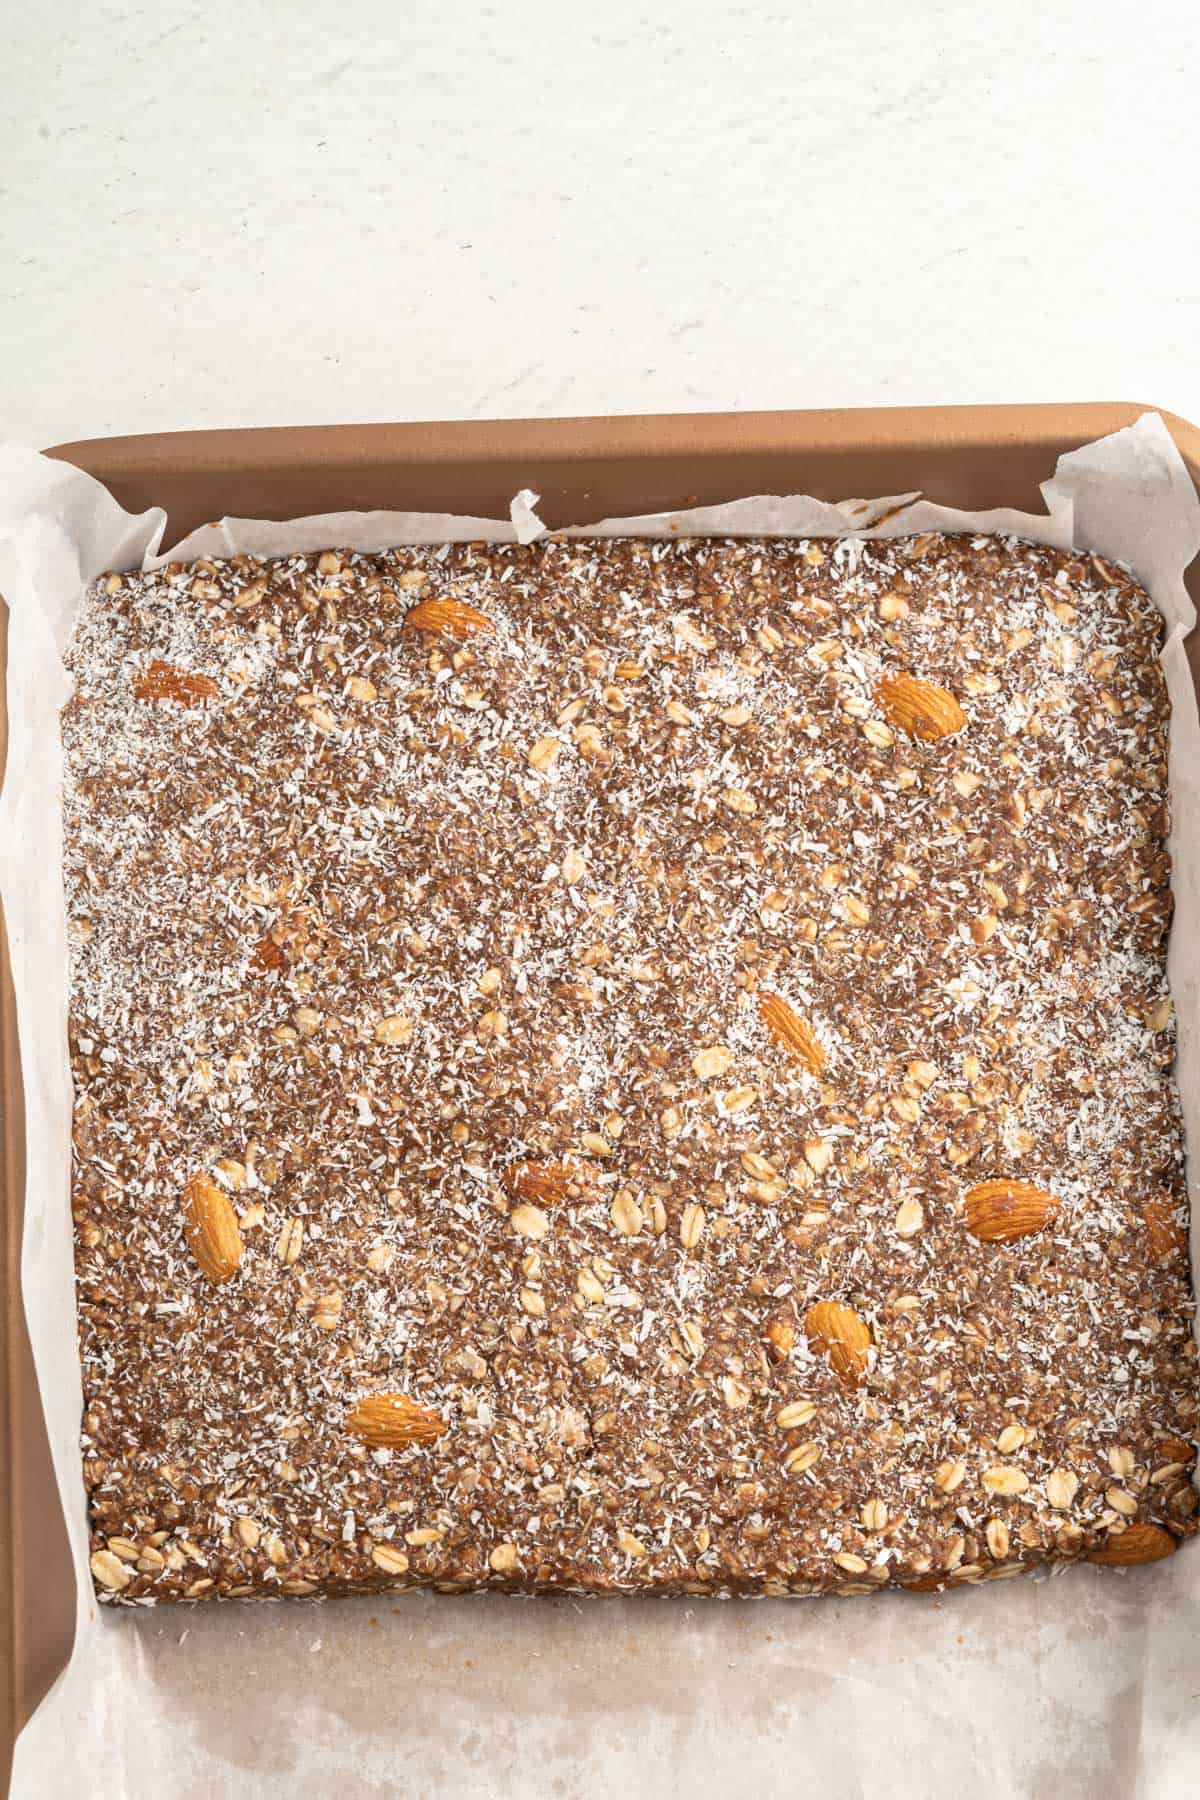 Choloate oat bar mix in a pan lined with parchment paper ready for setting in the fridge.